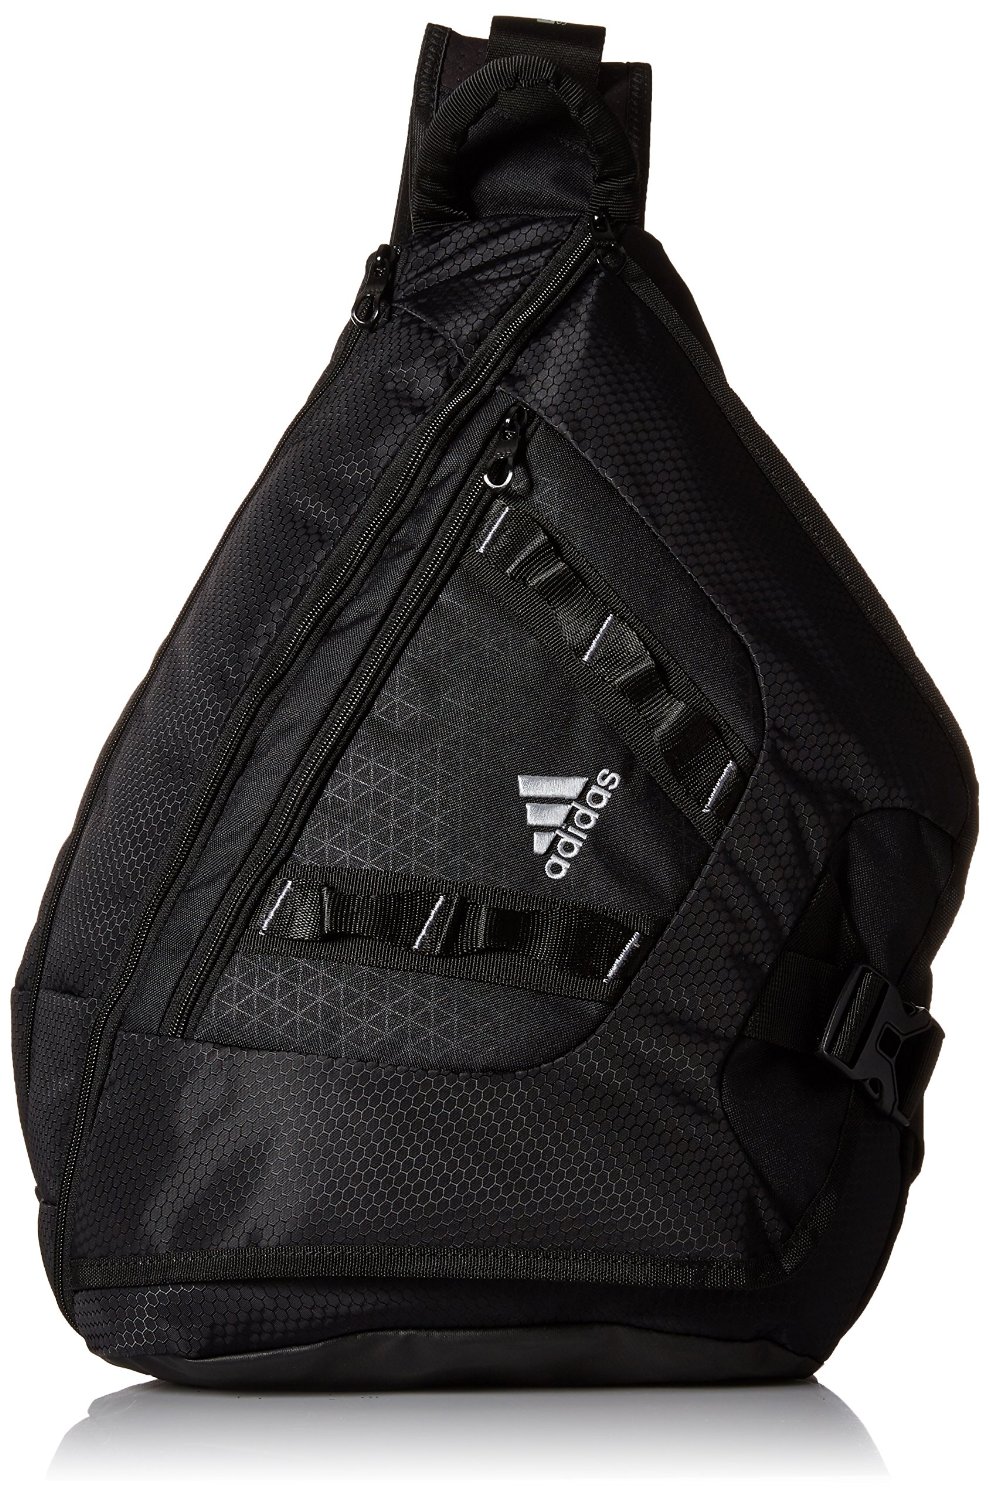 adidas Capital Sling Backpack (Black) from Do It Tennis